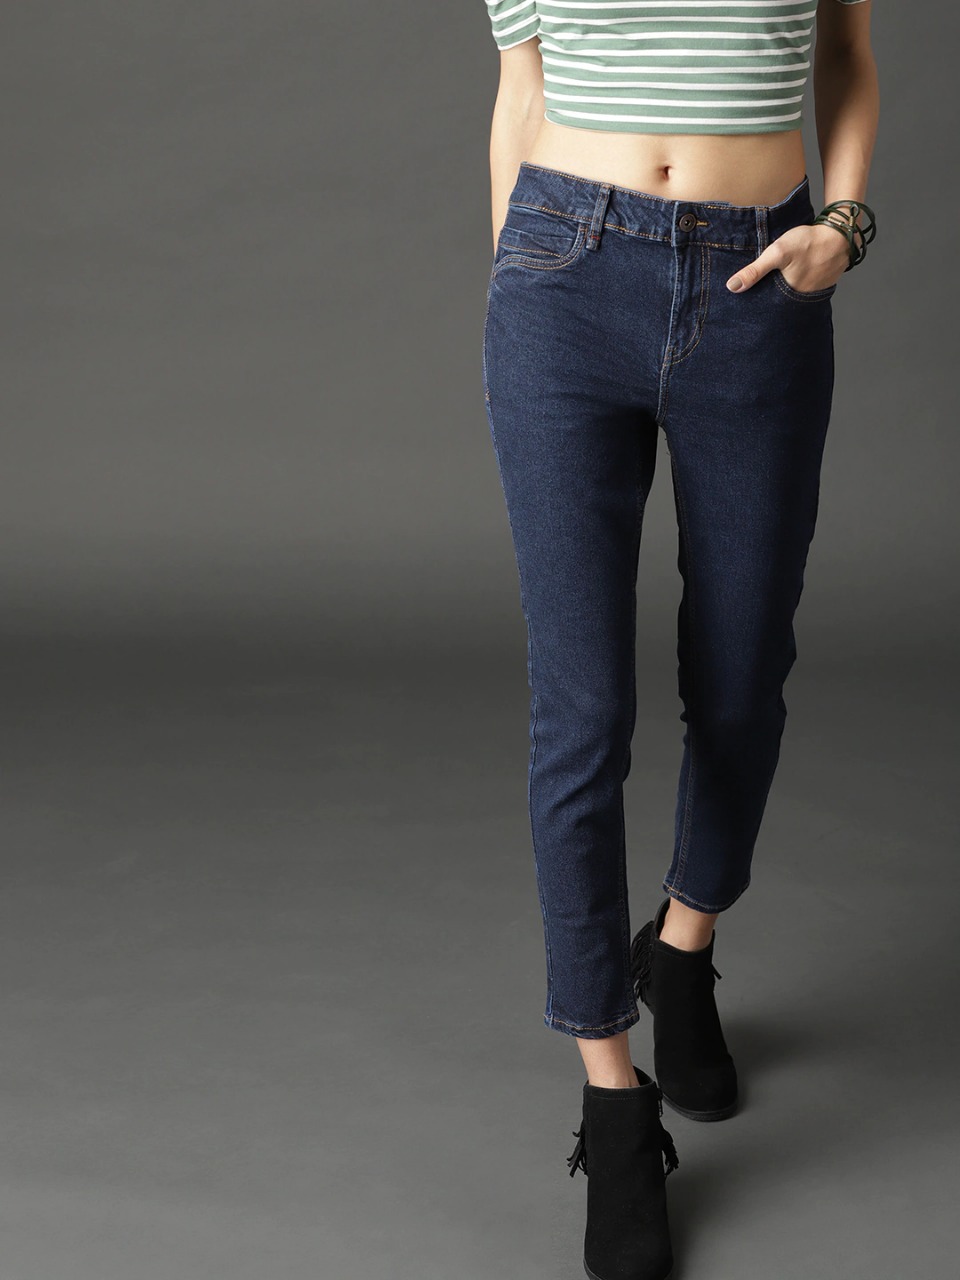 Roadster Women's Jeans upto 86% Off starting @364 - THE DEAL APP | Get Best  Deals, Discounts, Offers, Coupons for Shopping in India